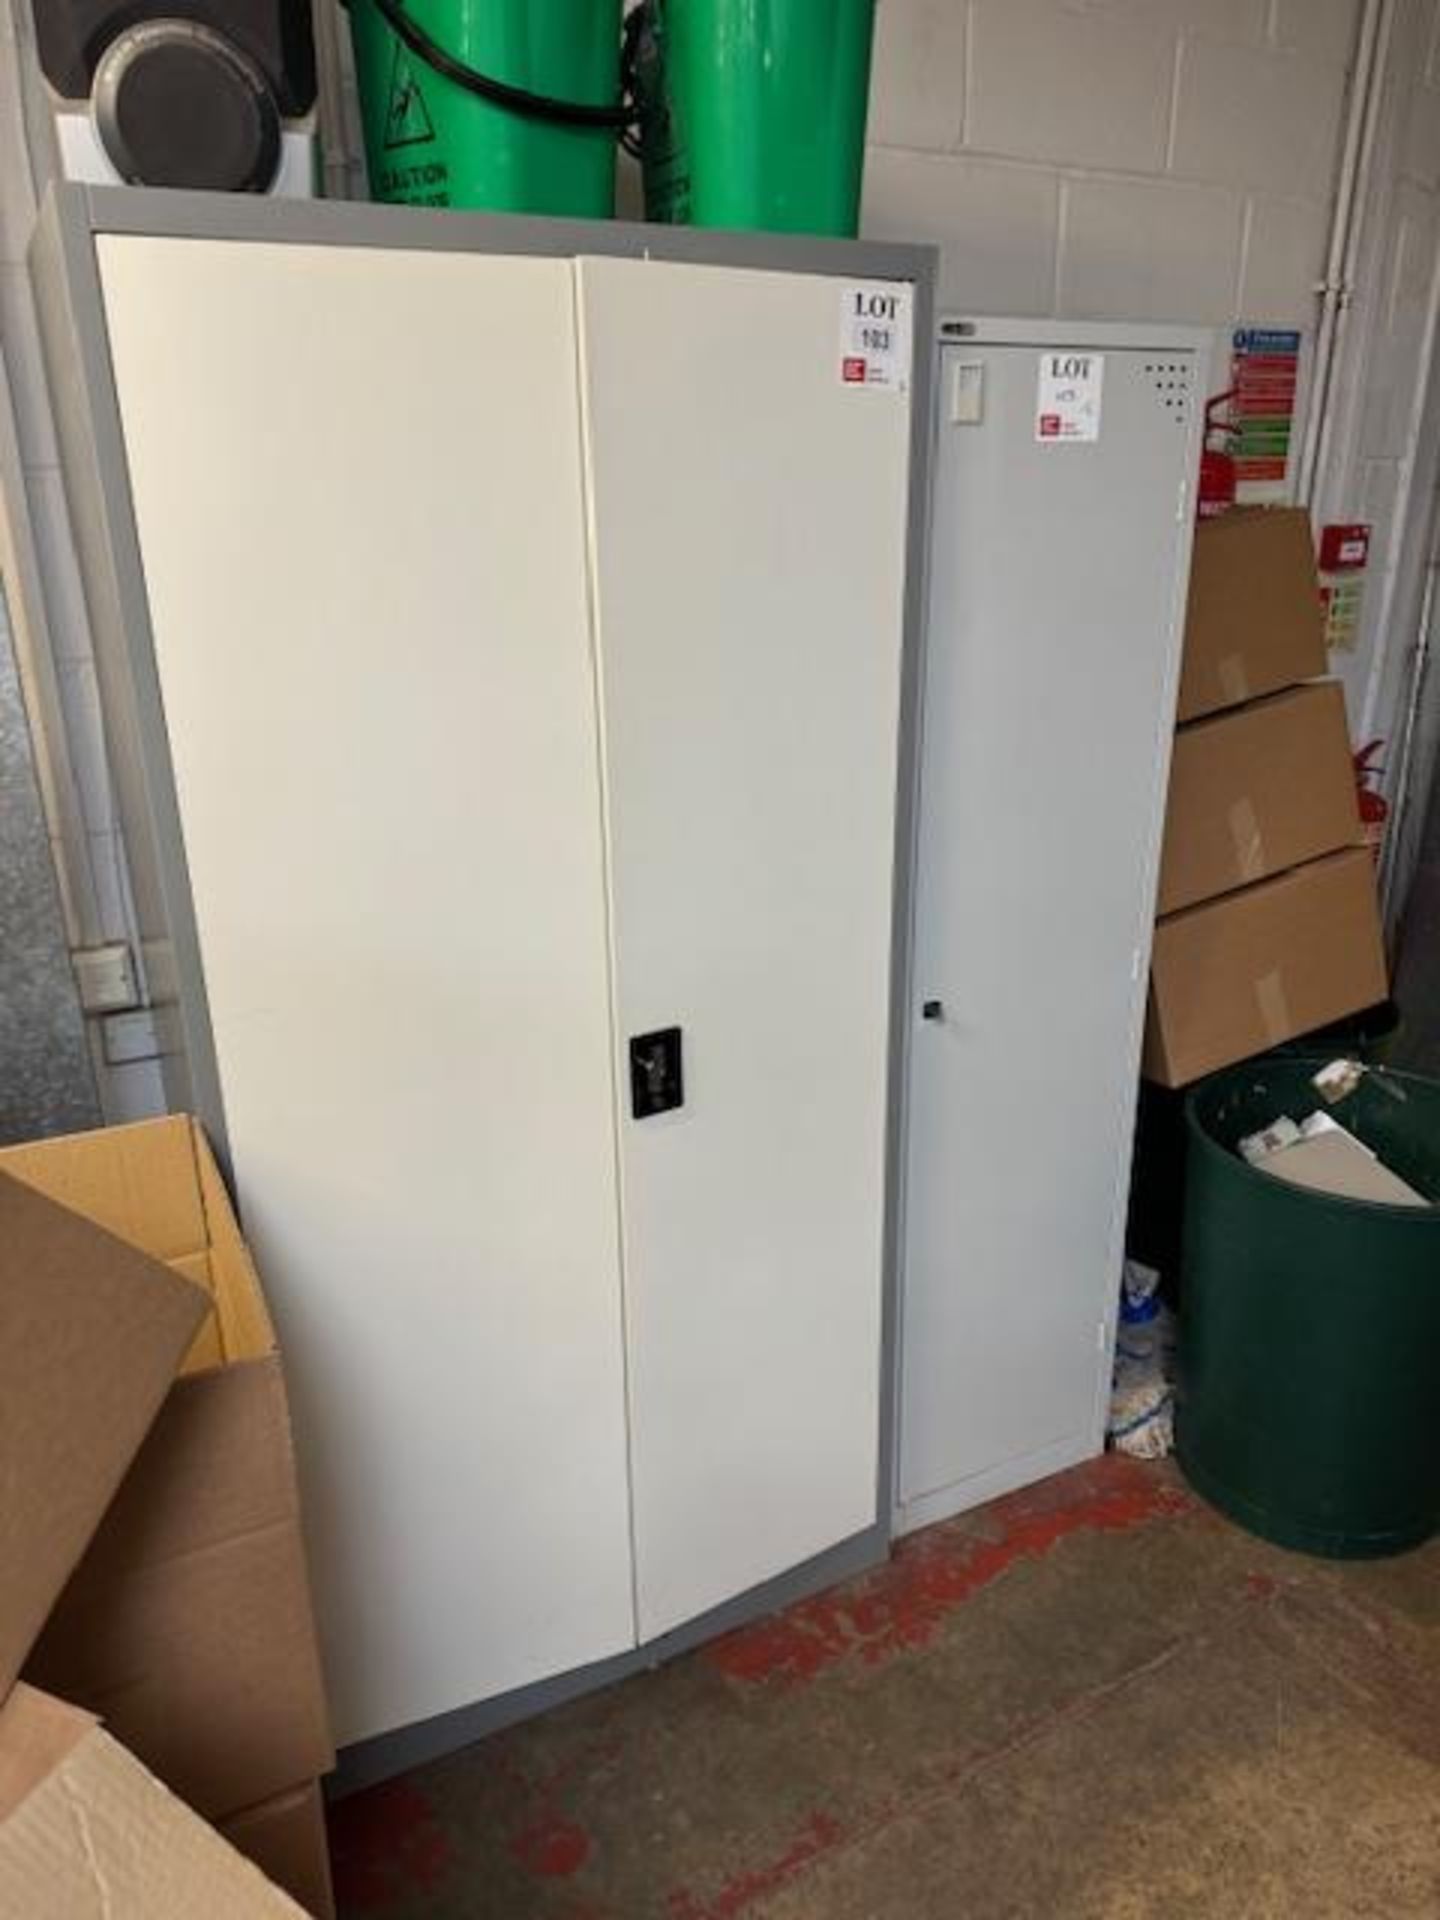 One double door and one single door metal cabinets with various cleaning products (as lotted)